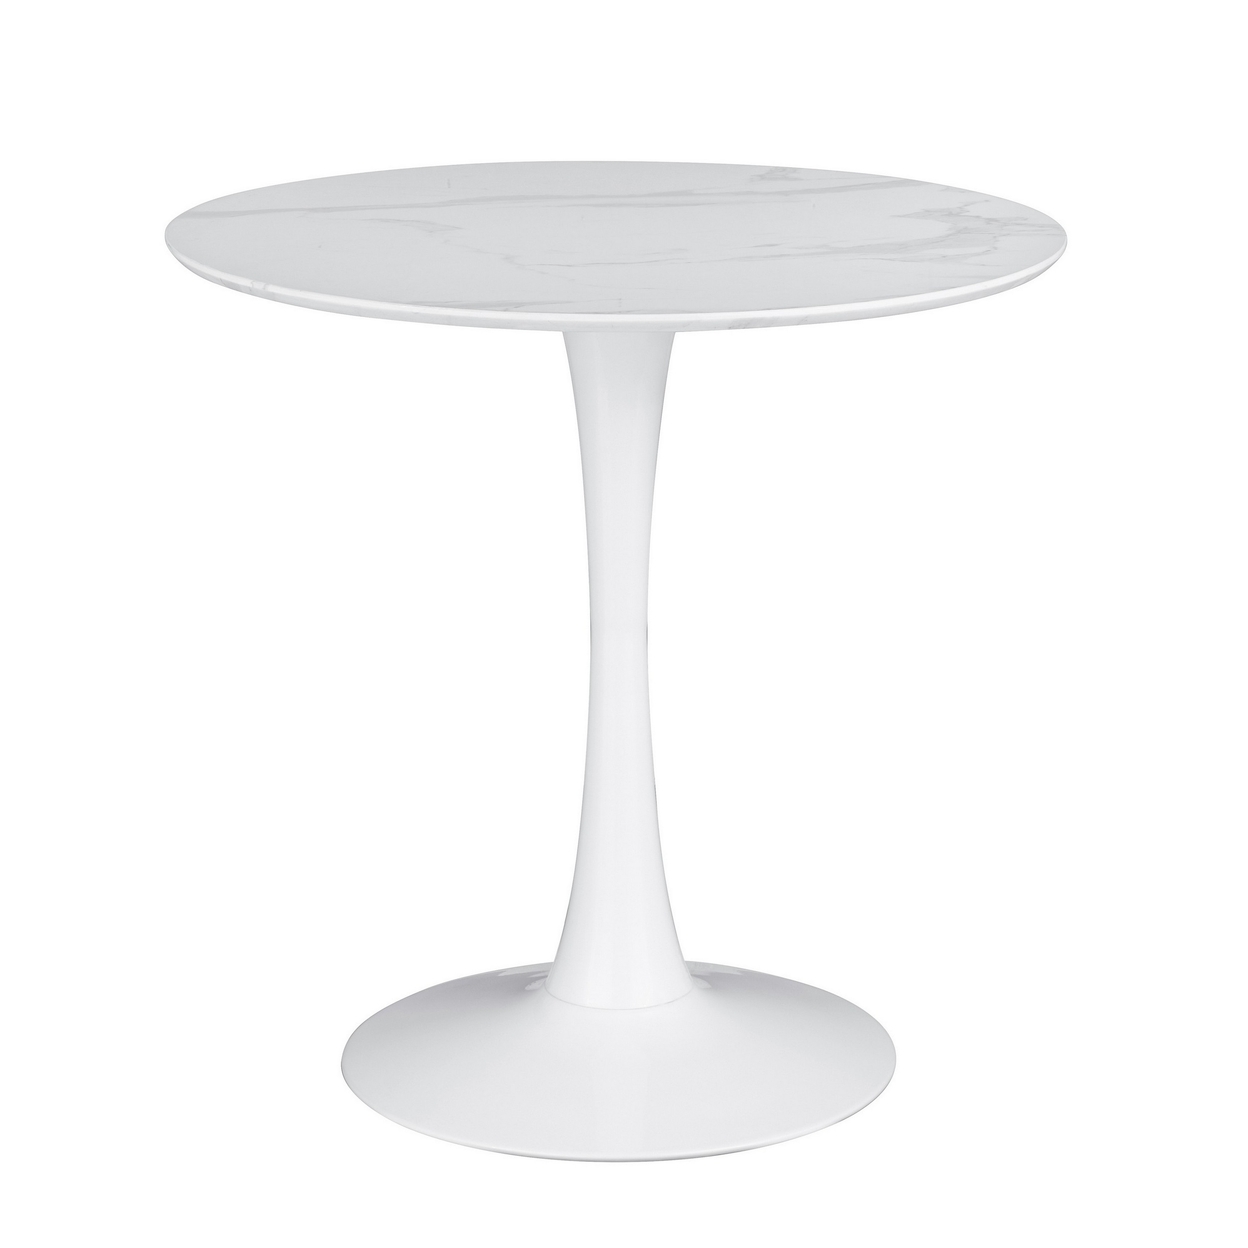 Loxi 30 Inch Round Dining Table, White Faux Marble Top, Tulip Accent Body- Saltoro Sherpi